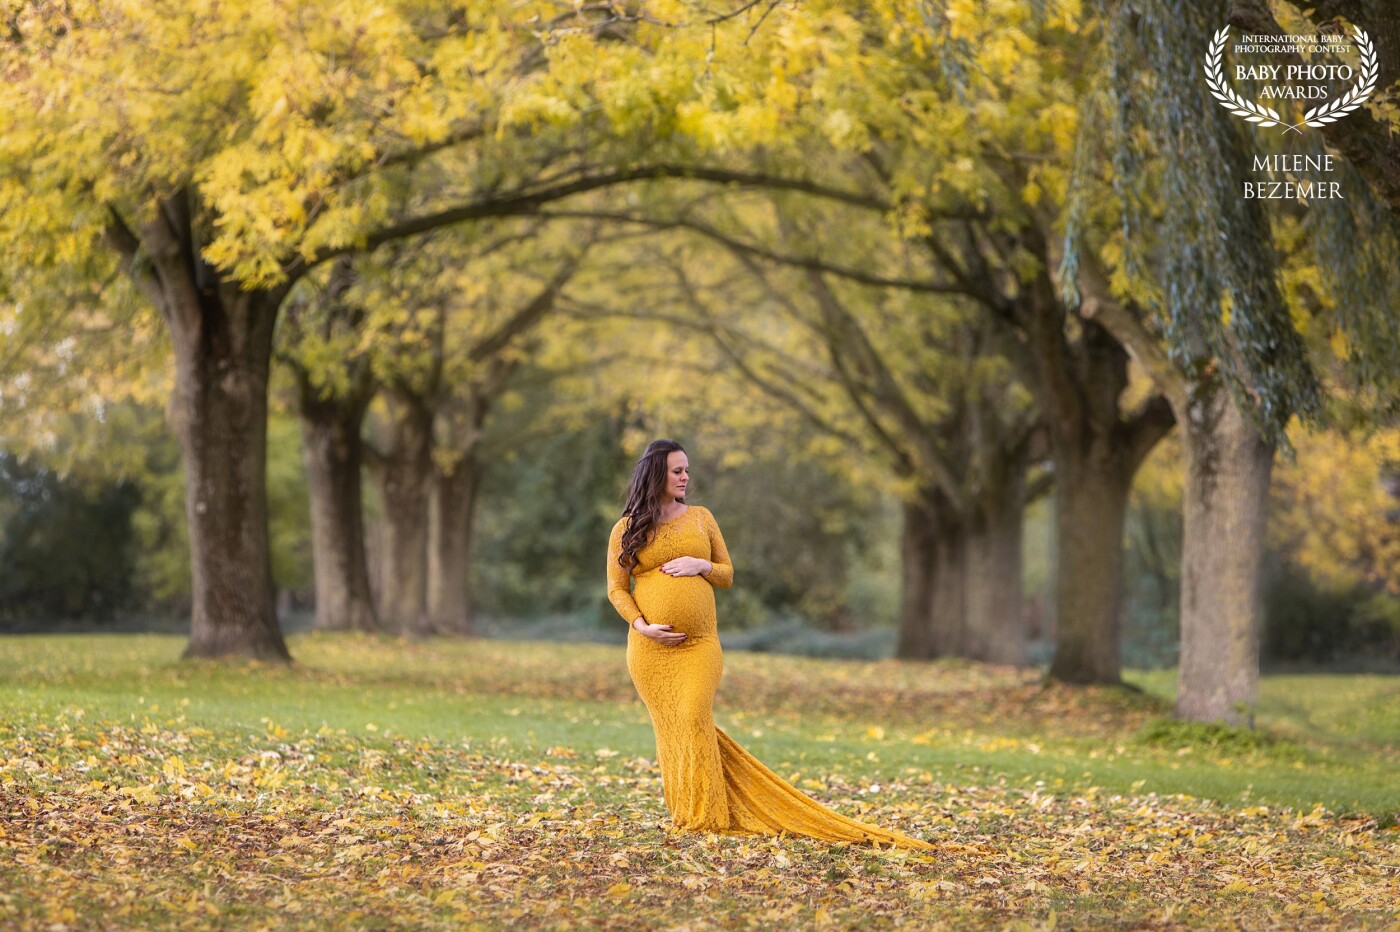 On this photo, this beauty is 31 weeks pregnant with her son. The little one was born some weeks later and they are going to have beautiful adventures together.